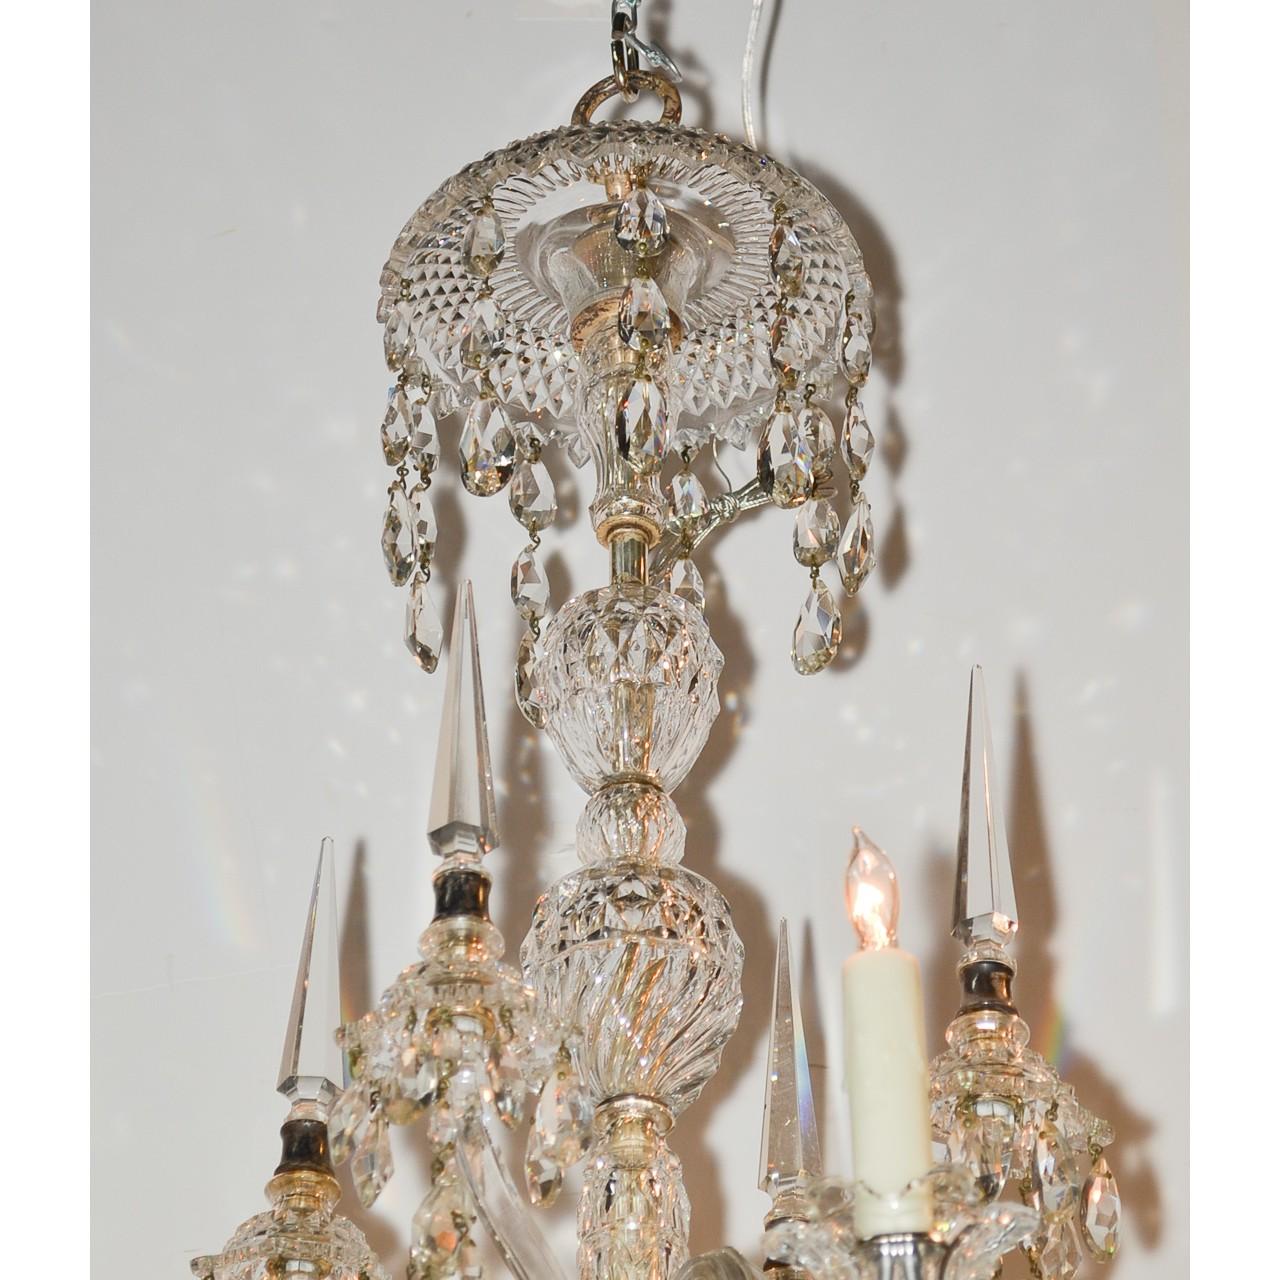 Carved Antique English Waterford Style Crystal Chandelier